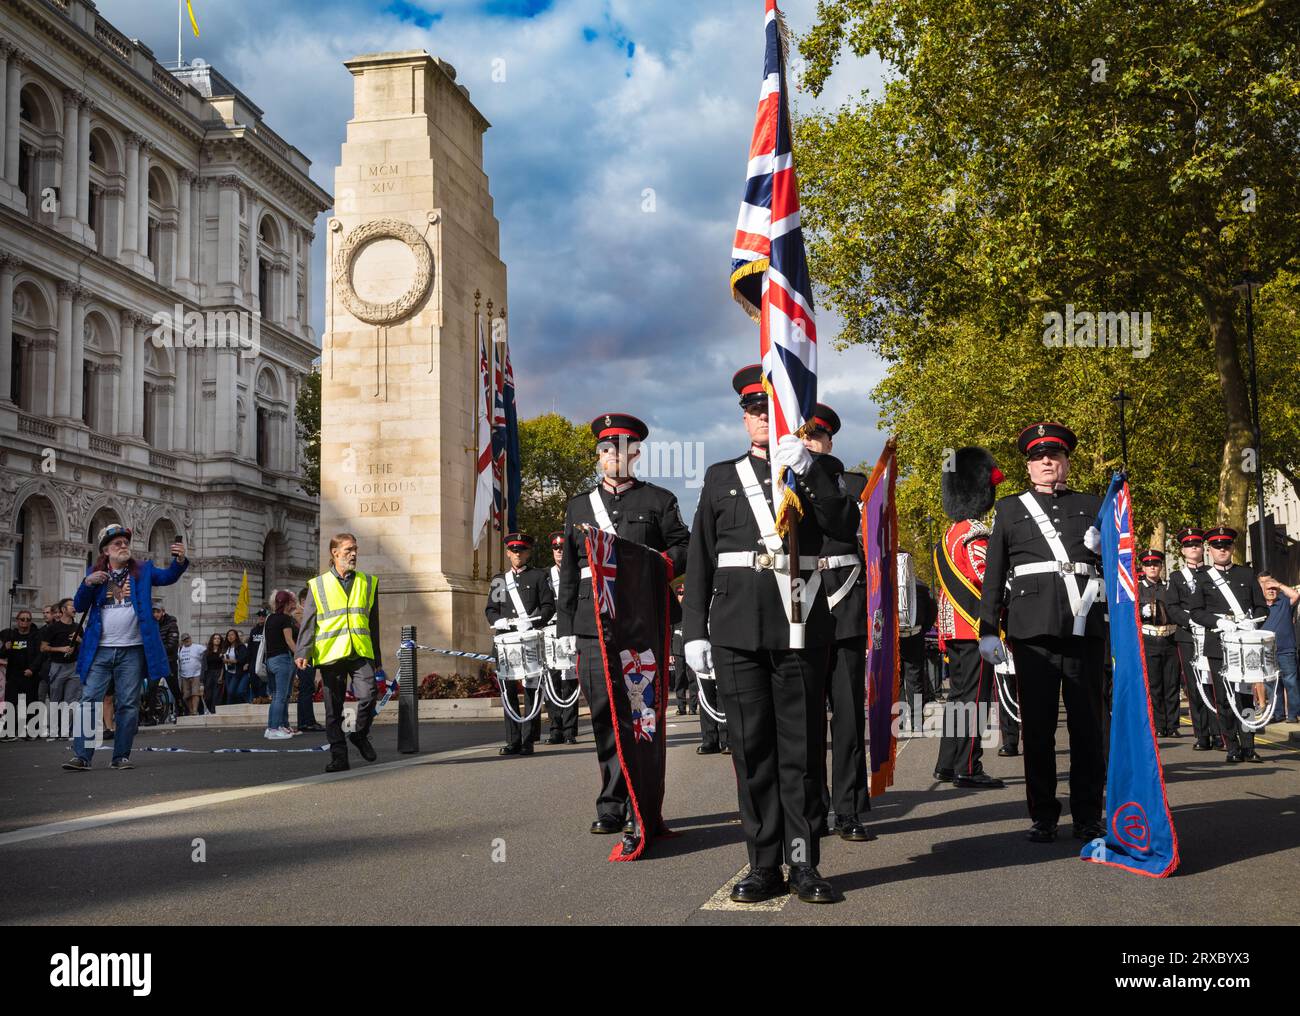 Members of the Irish protestant loyalist paramilitary Ulster Volunteer Force (UVF) display their regimental colours at the Cenotaph war memorial in Wh Stock Photo